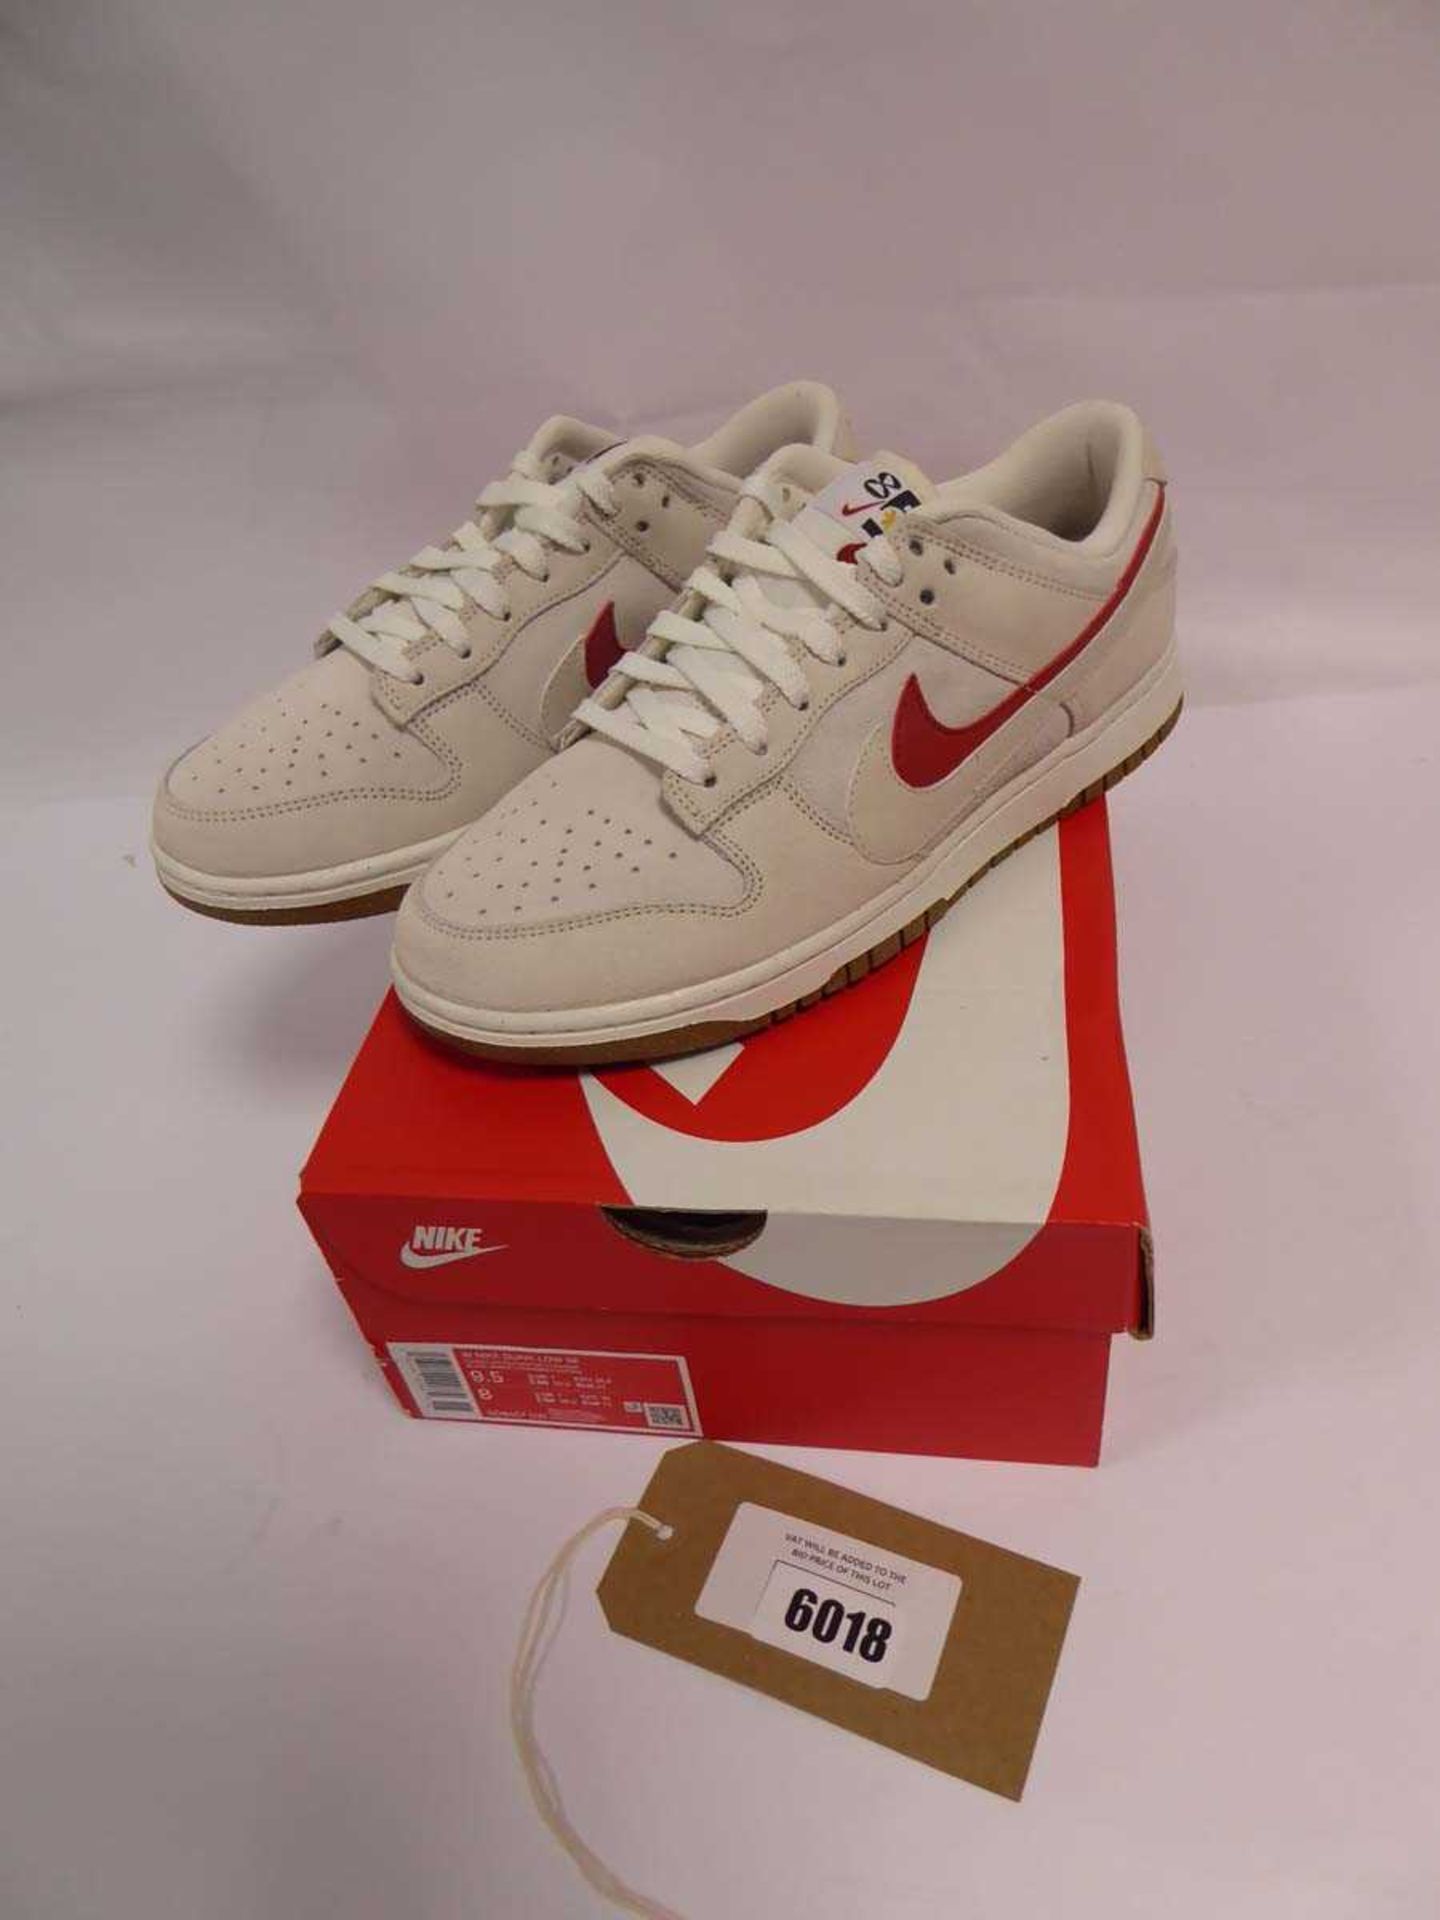 +VAT Boxed pair of women's Nike Dunk Low SE trainers in white, size 7